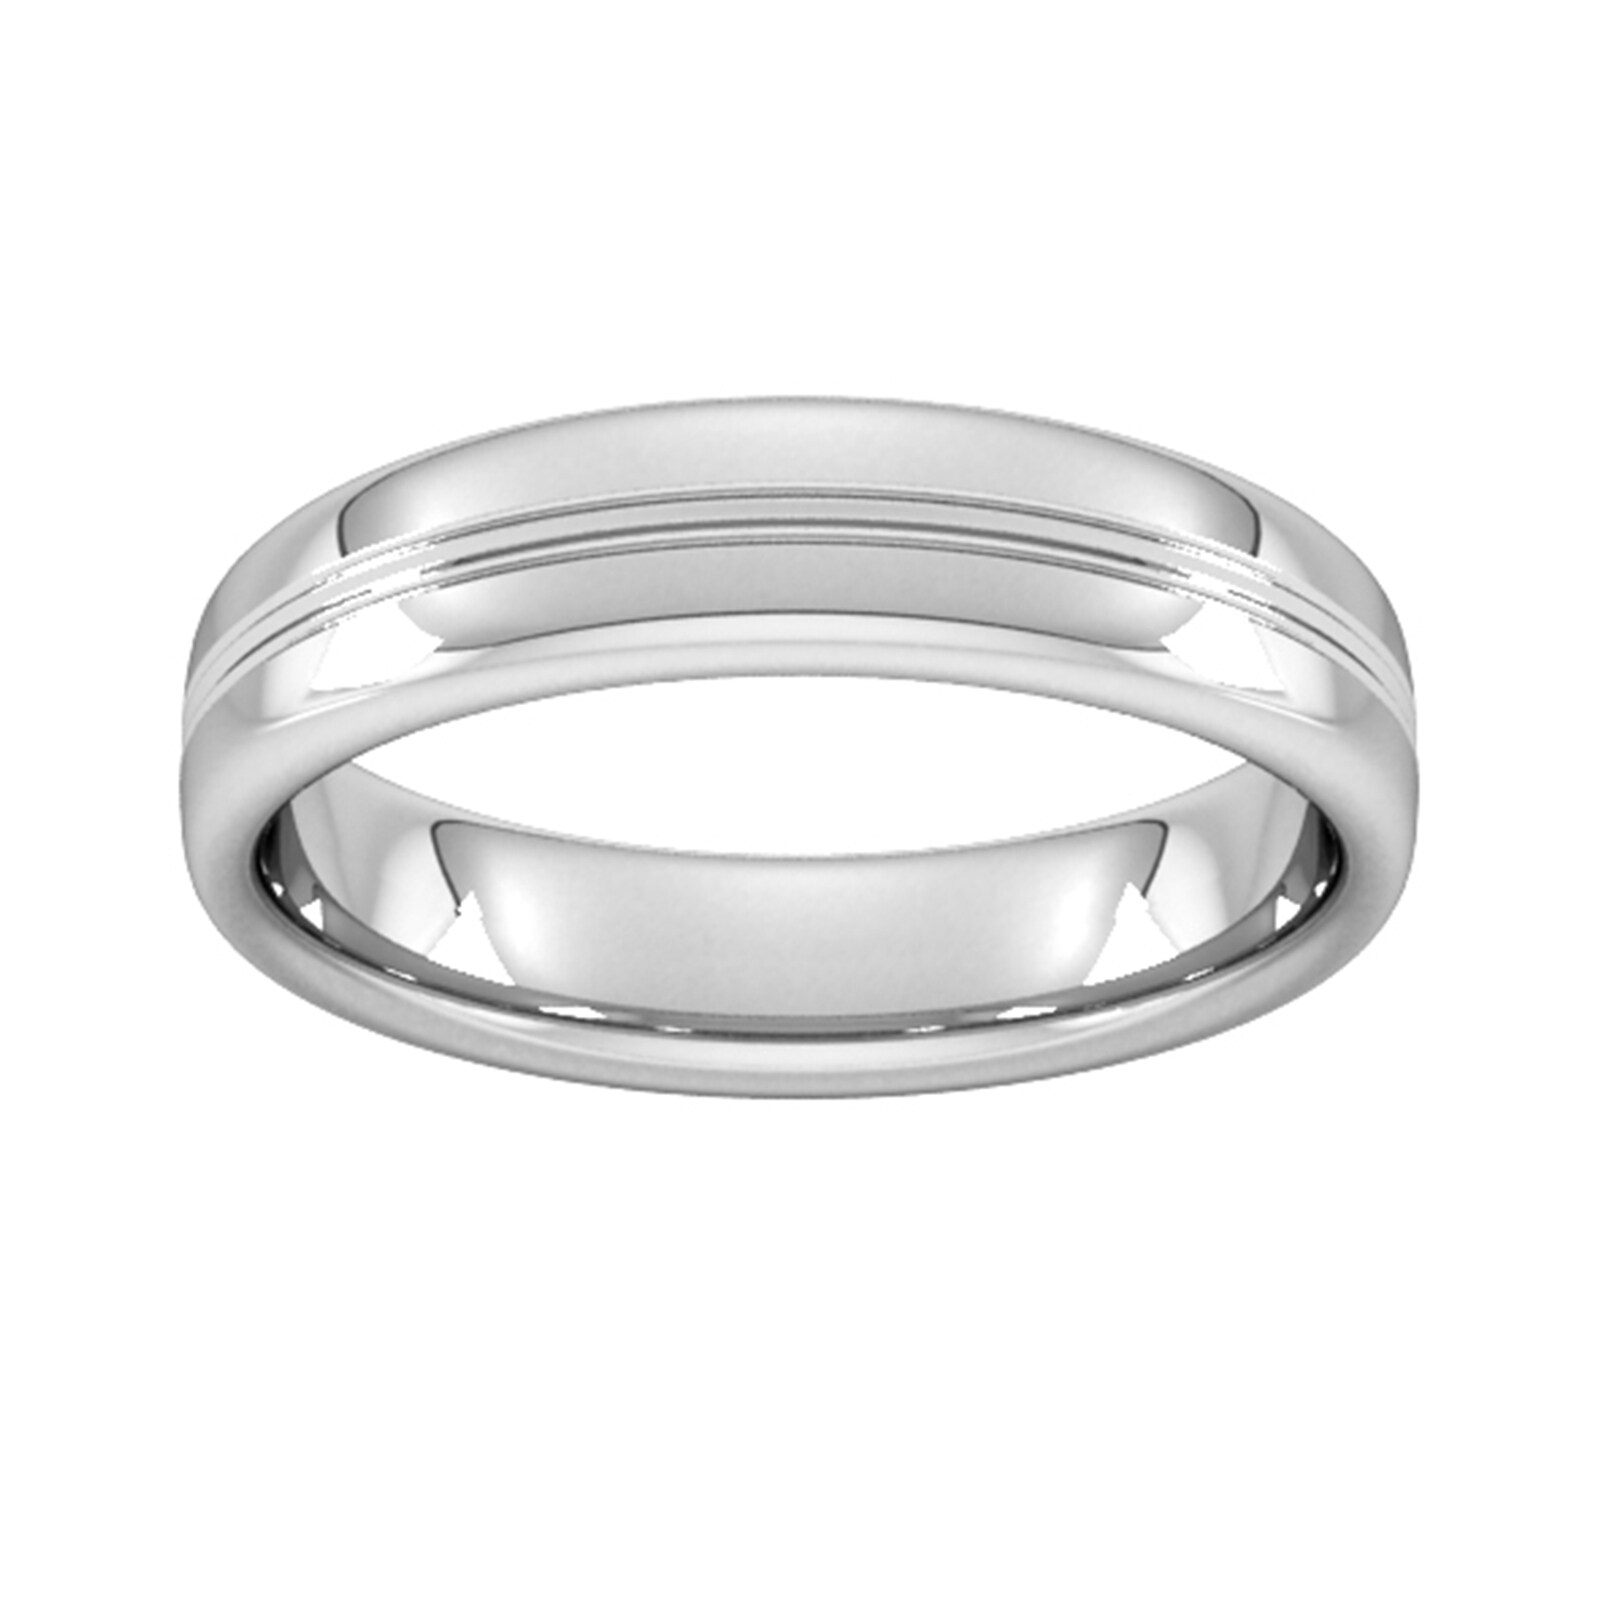 5mm Slight Court Extra Heavy Grooved Polished Finish Wedding Ring In 950 Palladium - Ring Size G